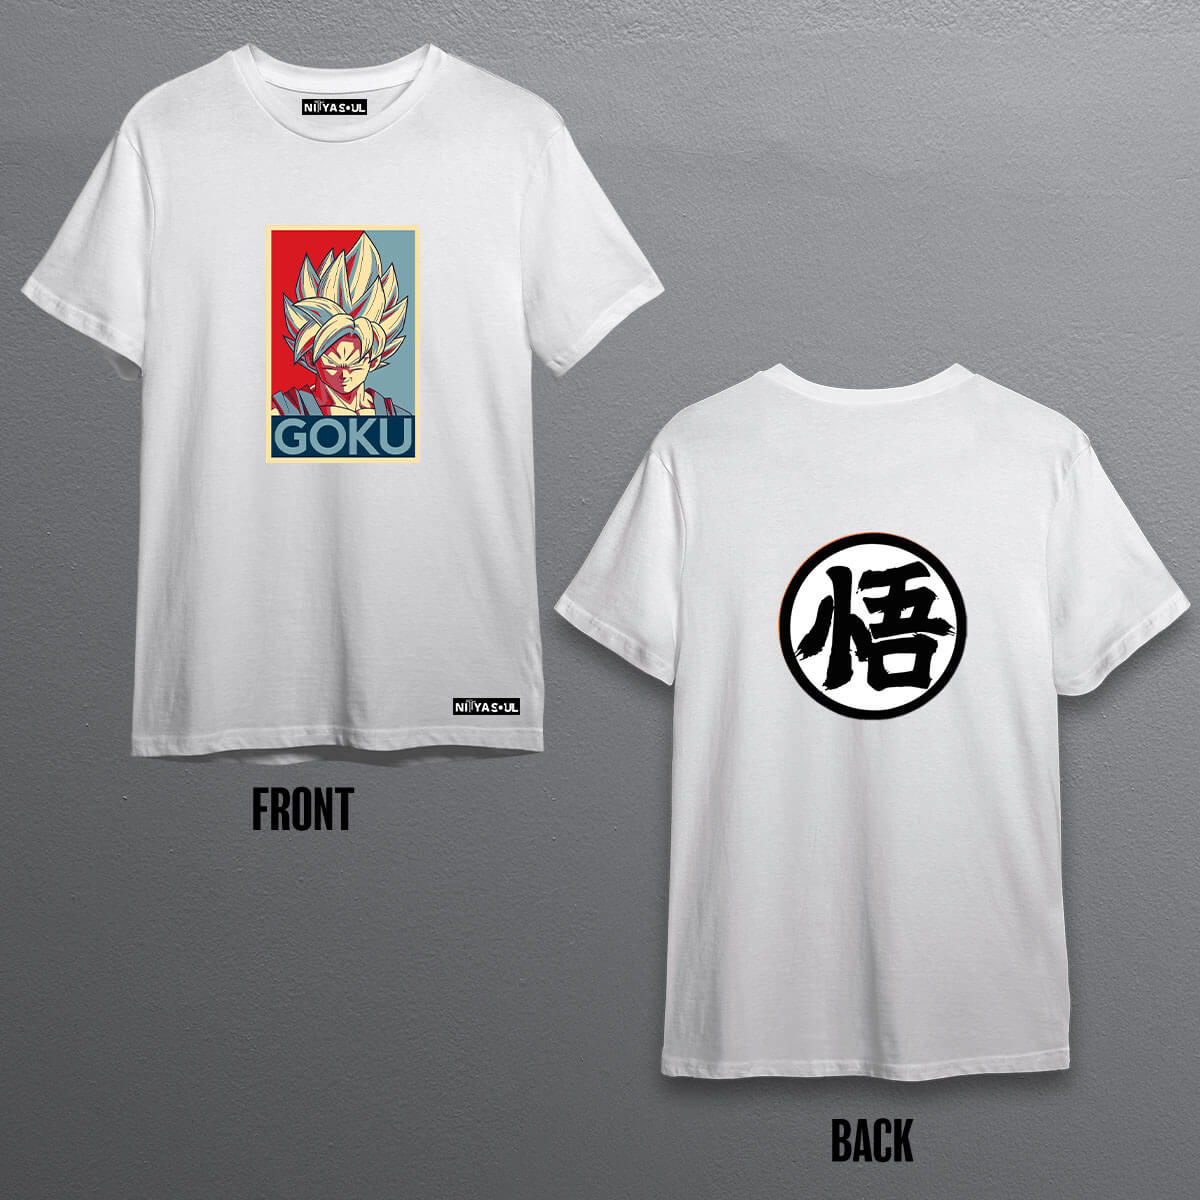 new-front-back-tee1-new-front-back-teek